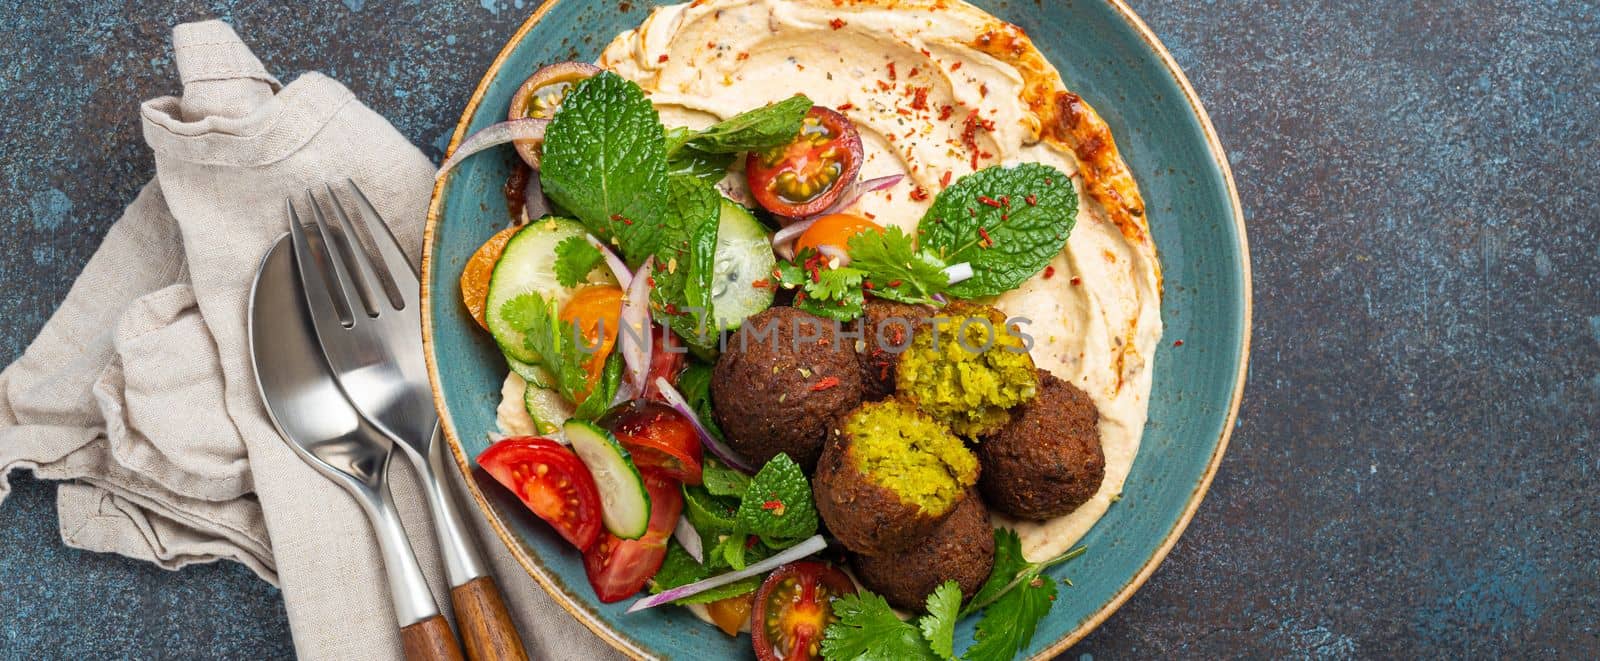 Middle Eastern Arab meal with fried falafel, hummus, vegetables salad with fresh green cilantro and mint leaves in ceramic bowl on stone rustic background top view. Arabian style breakfast or dinner